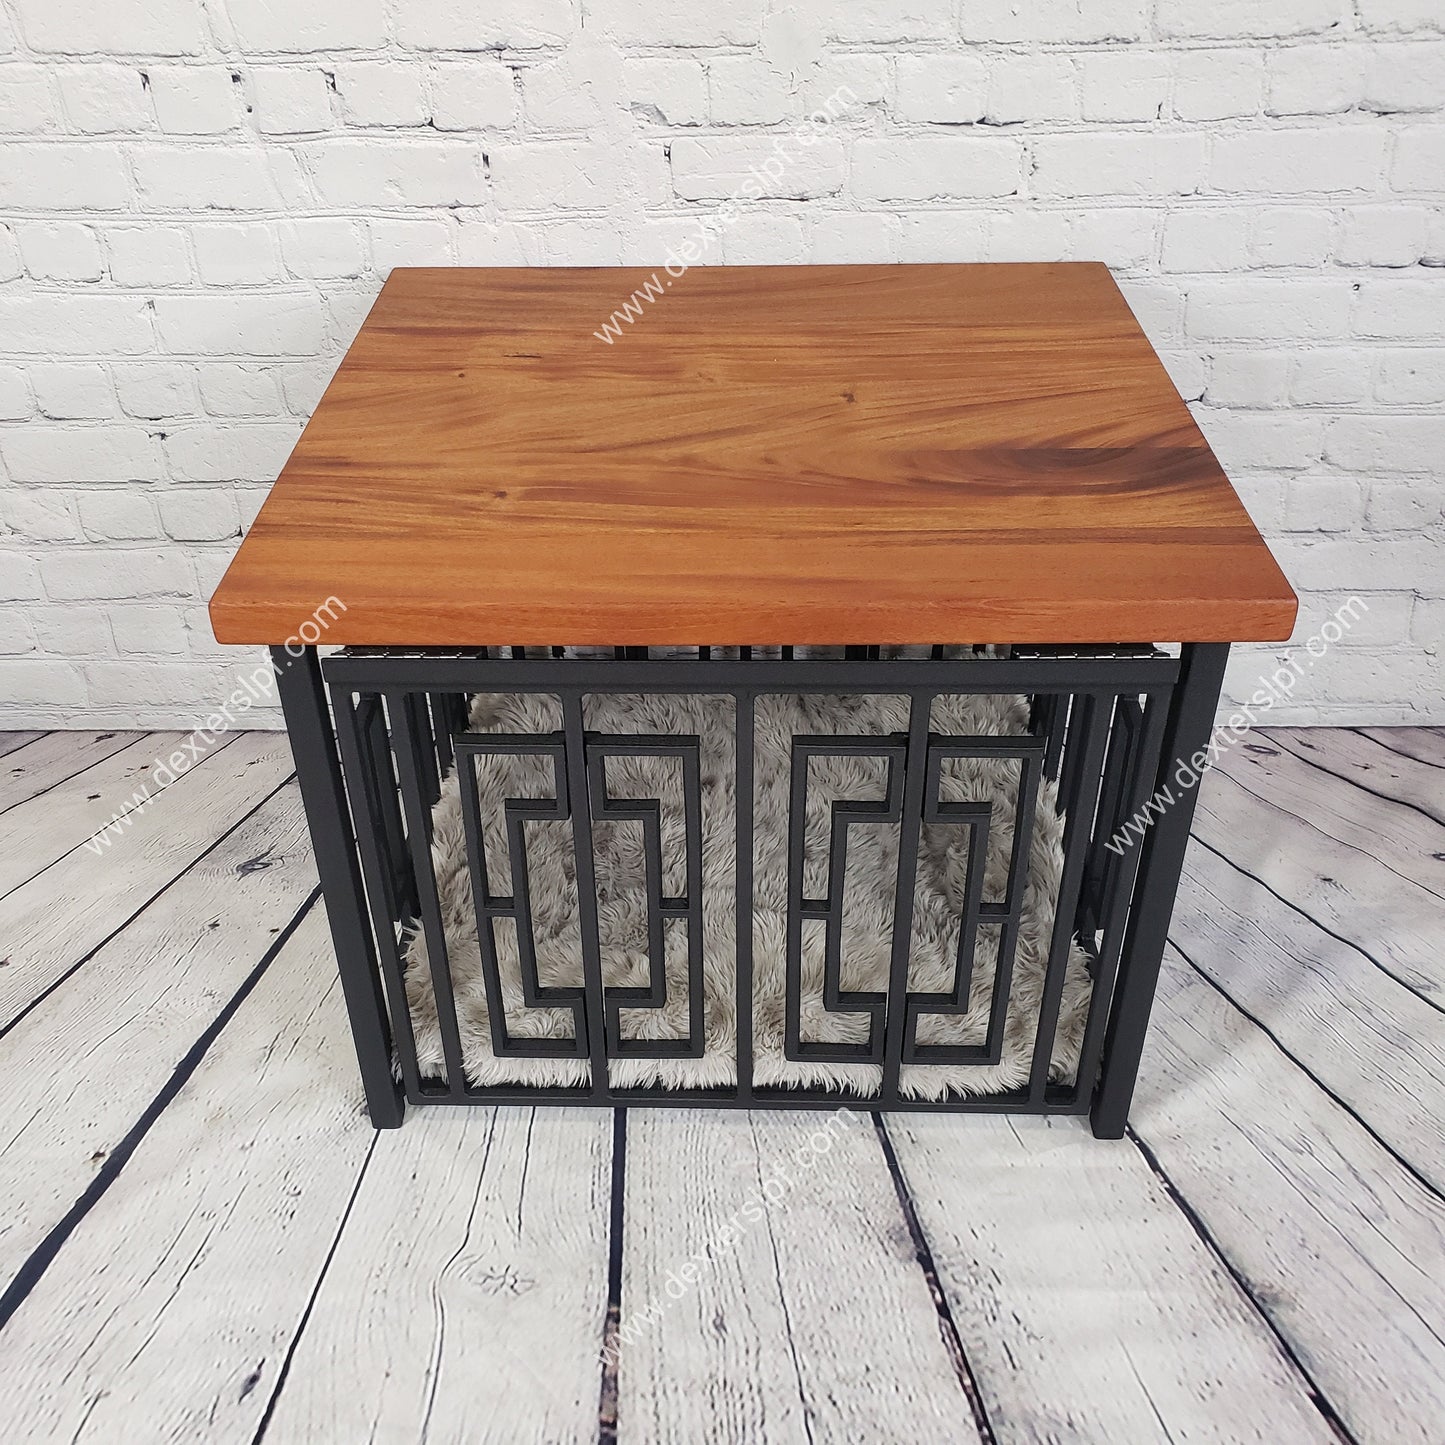 Layla Small Wide, Dog Crate Table, Modern Dog Crate, Dog Crate Furniture, Dog Kennel Furniture, Dog Crate End Table